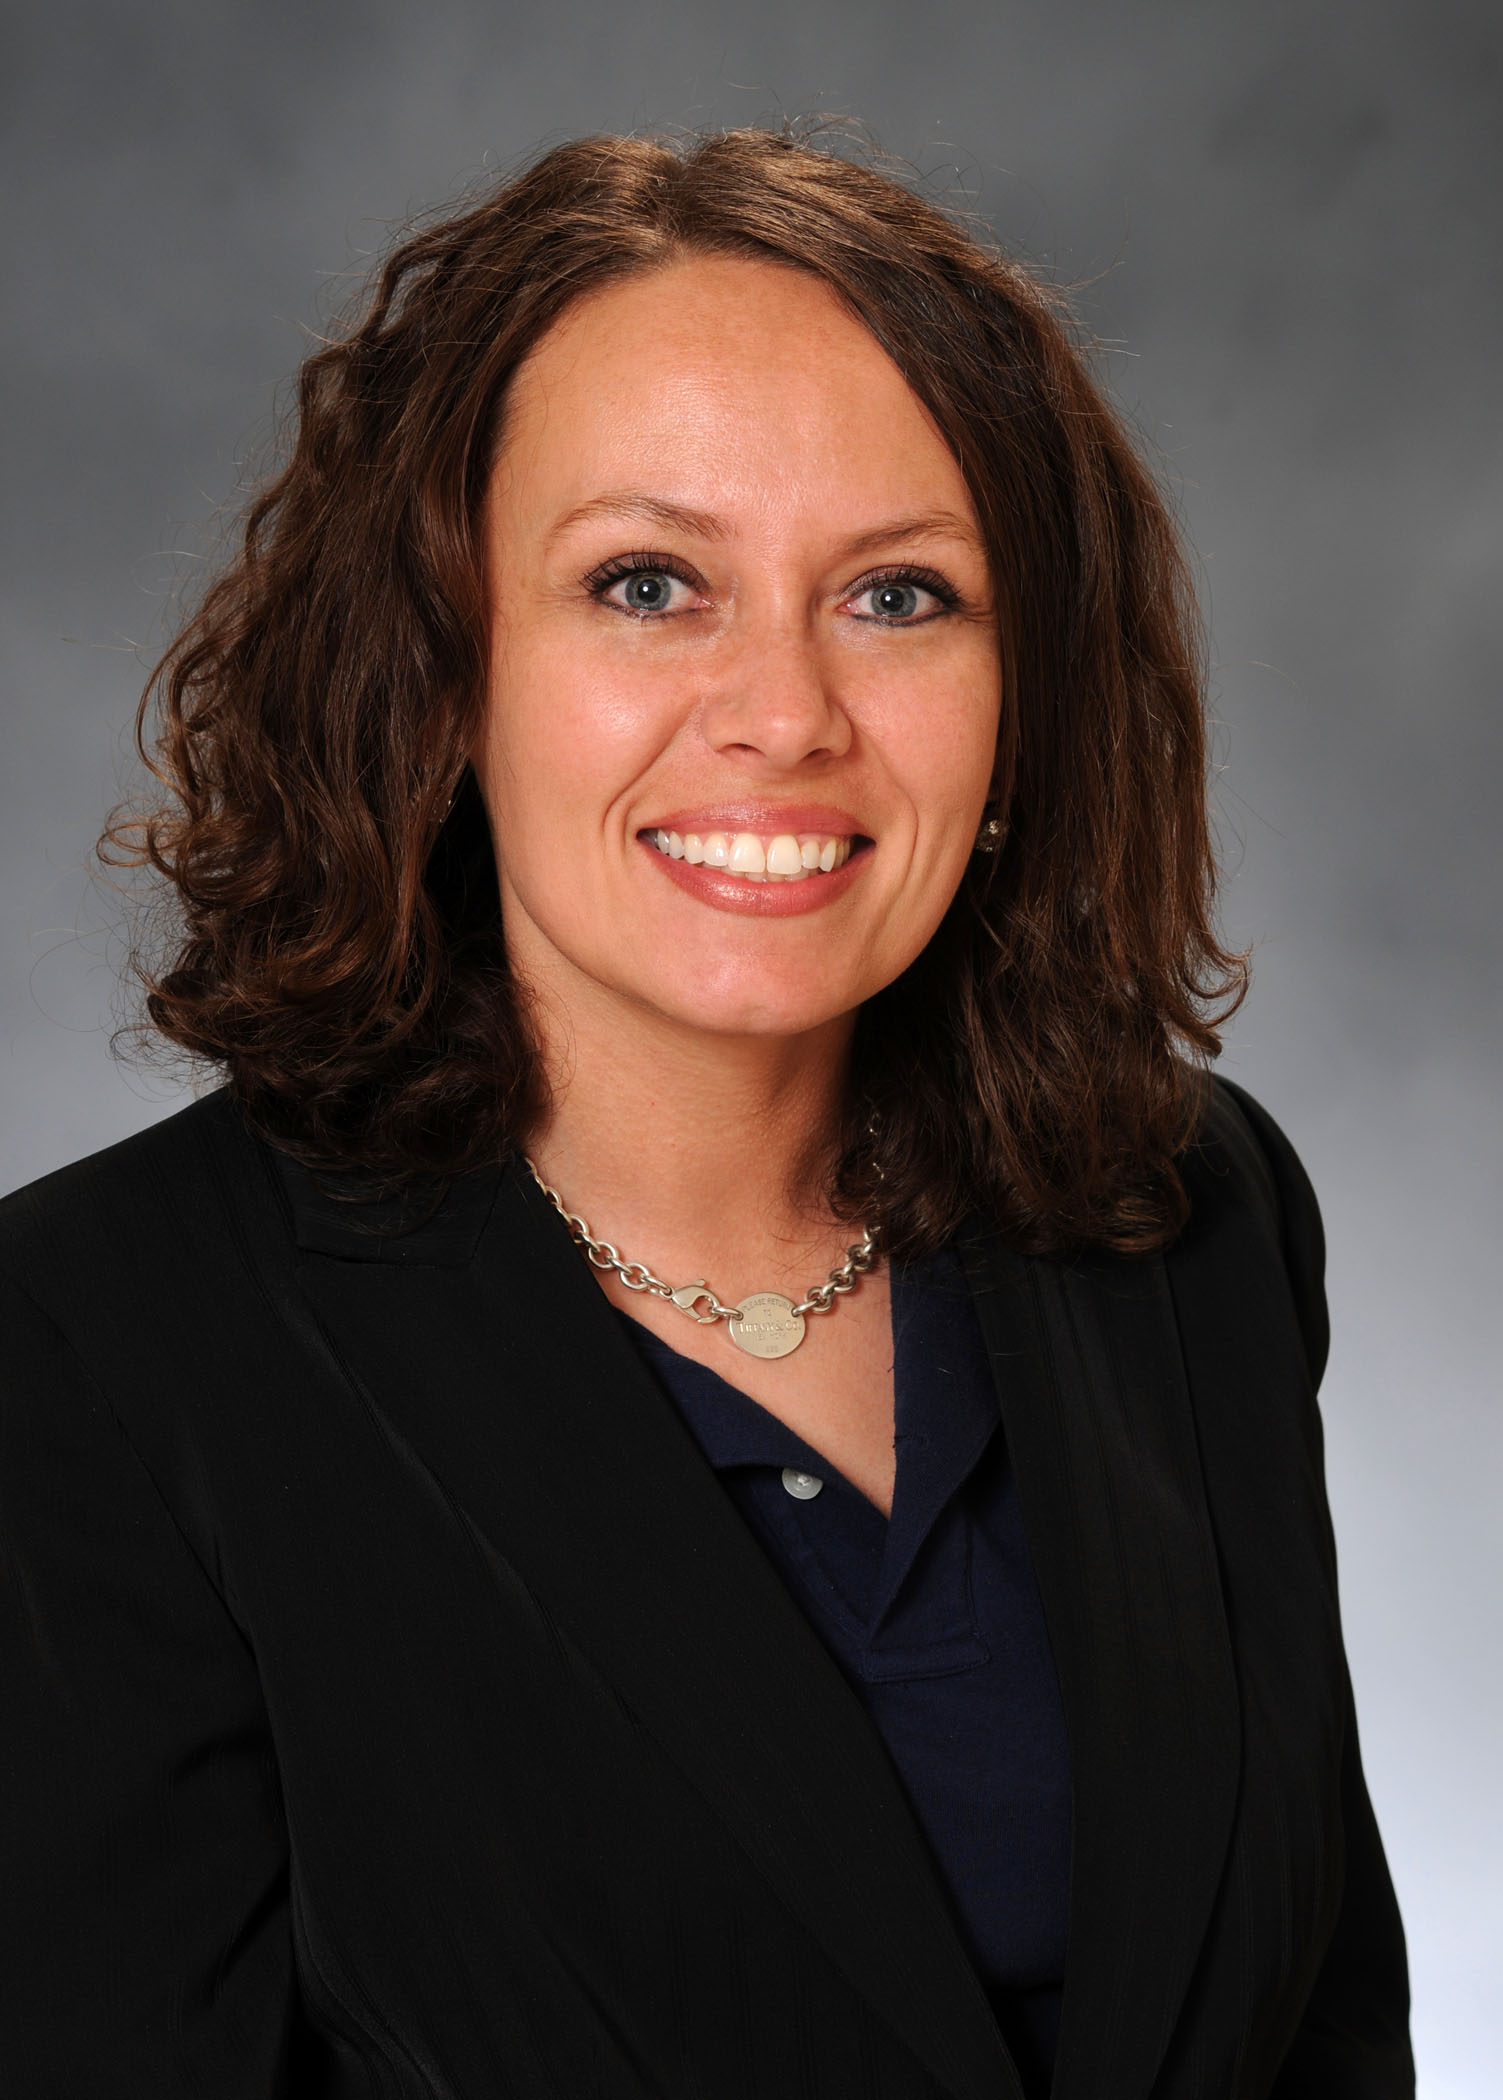 Photo of Dr. Stacey Fisher (vita)